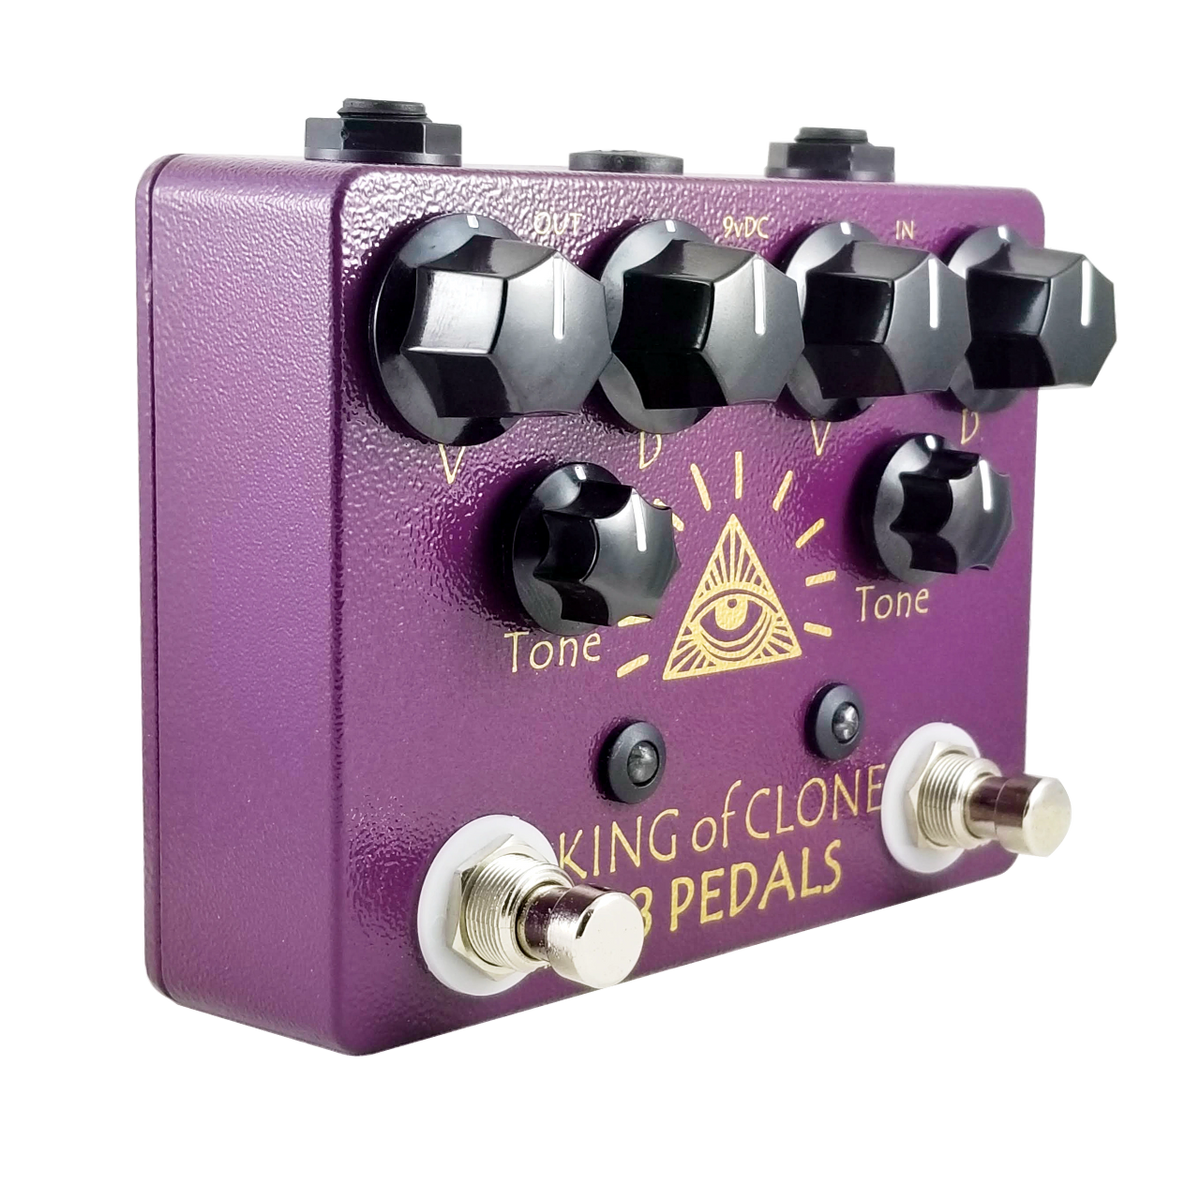 68 Pedals King of Clone Dual Overdrive Pedal